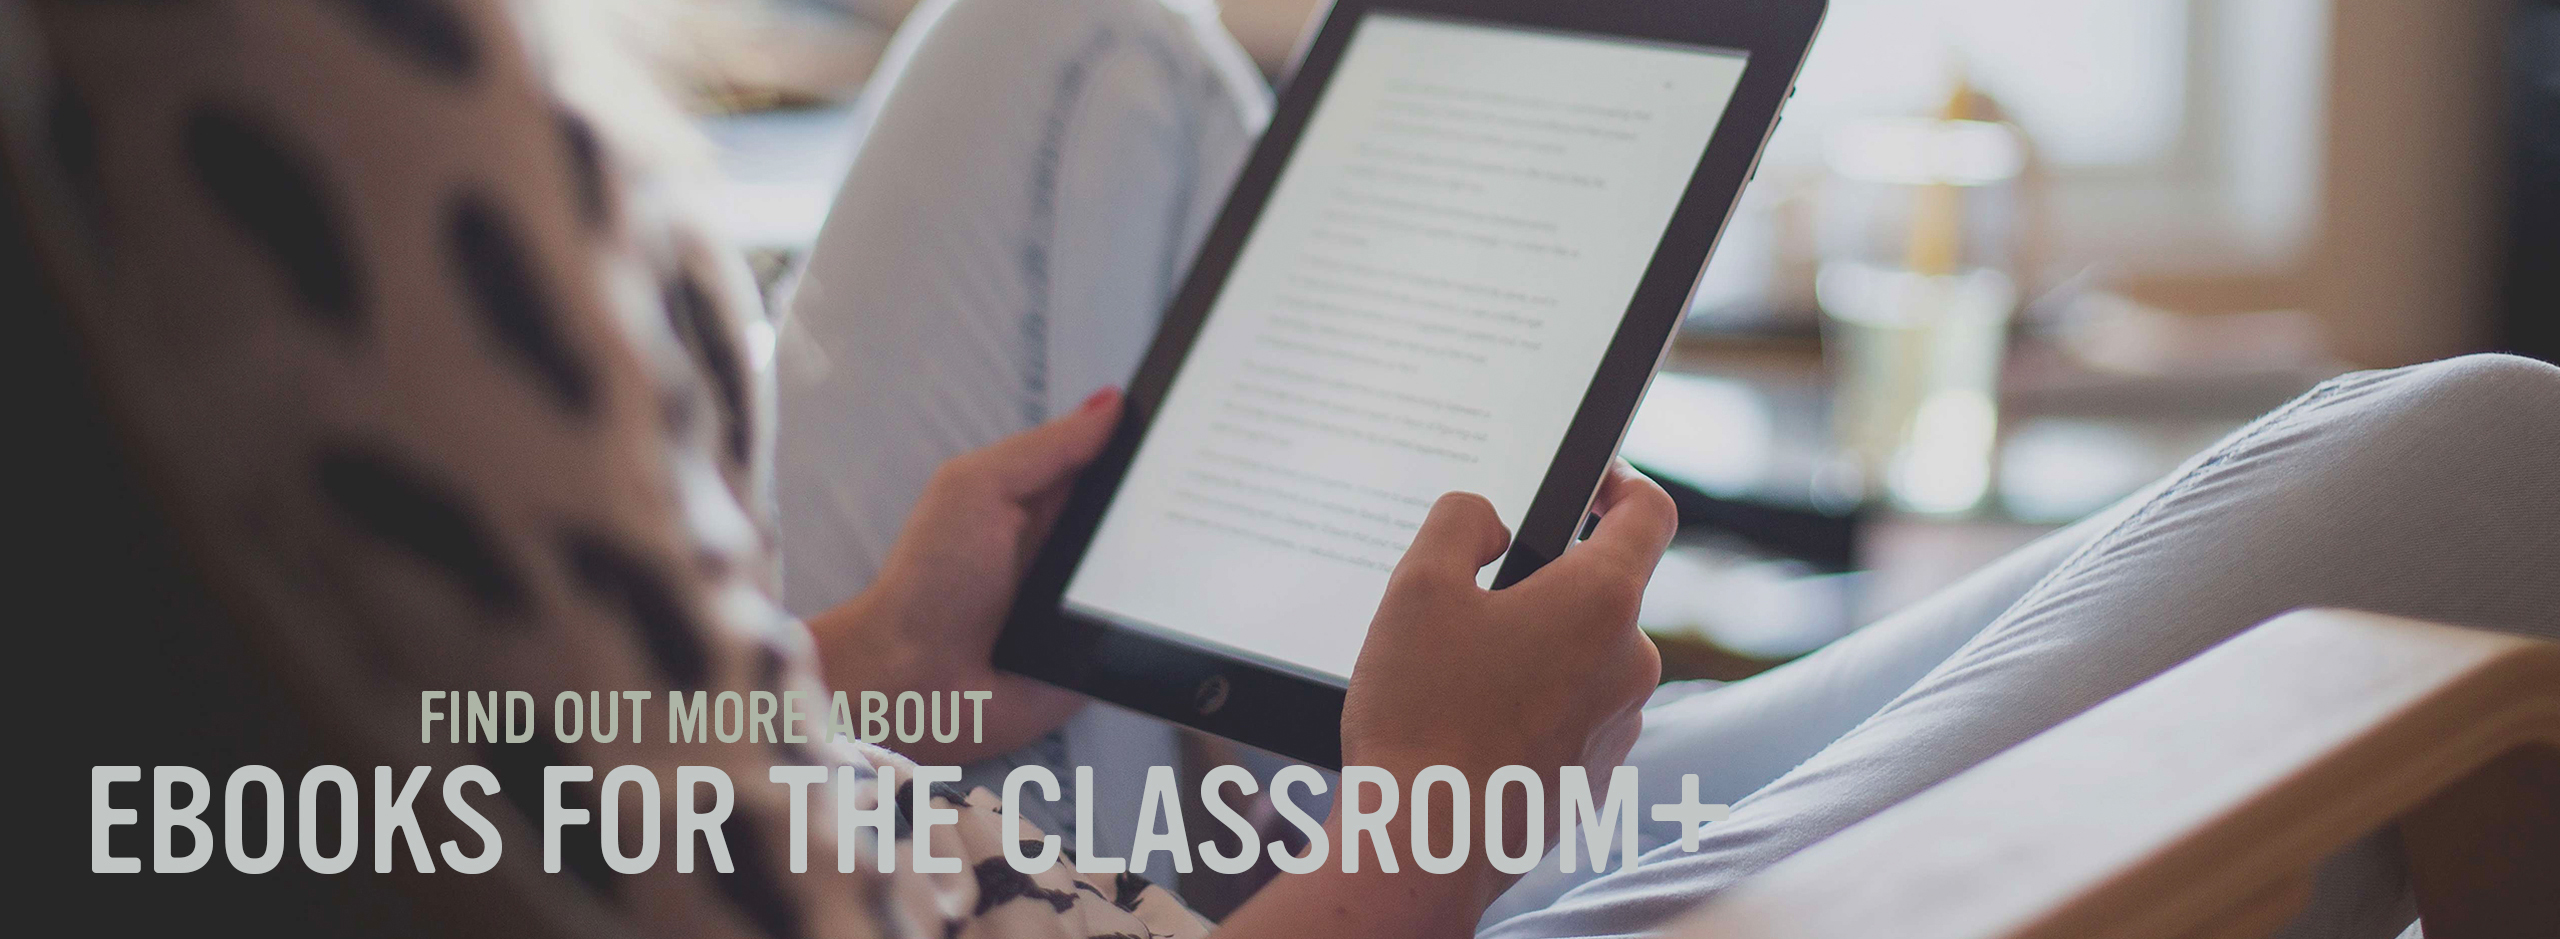 click here to find out more about ebooks for the classroom+